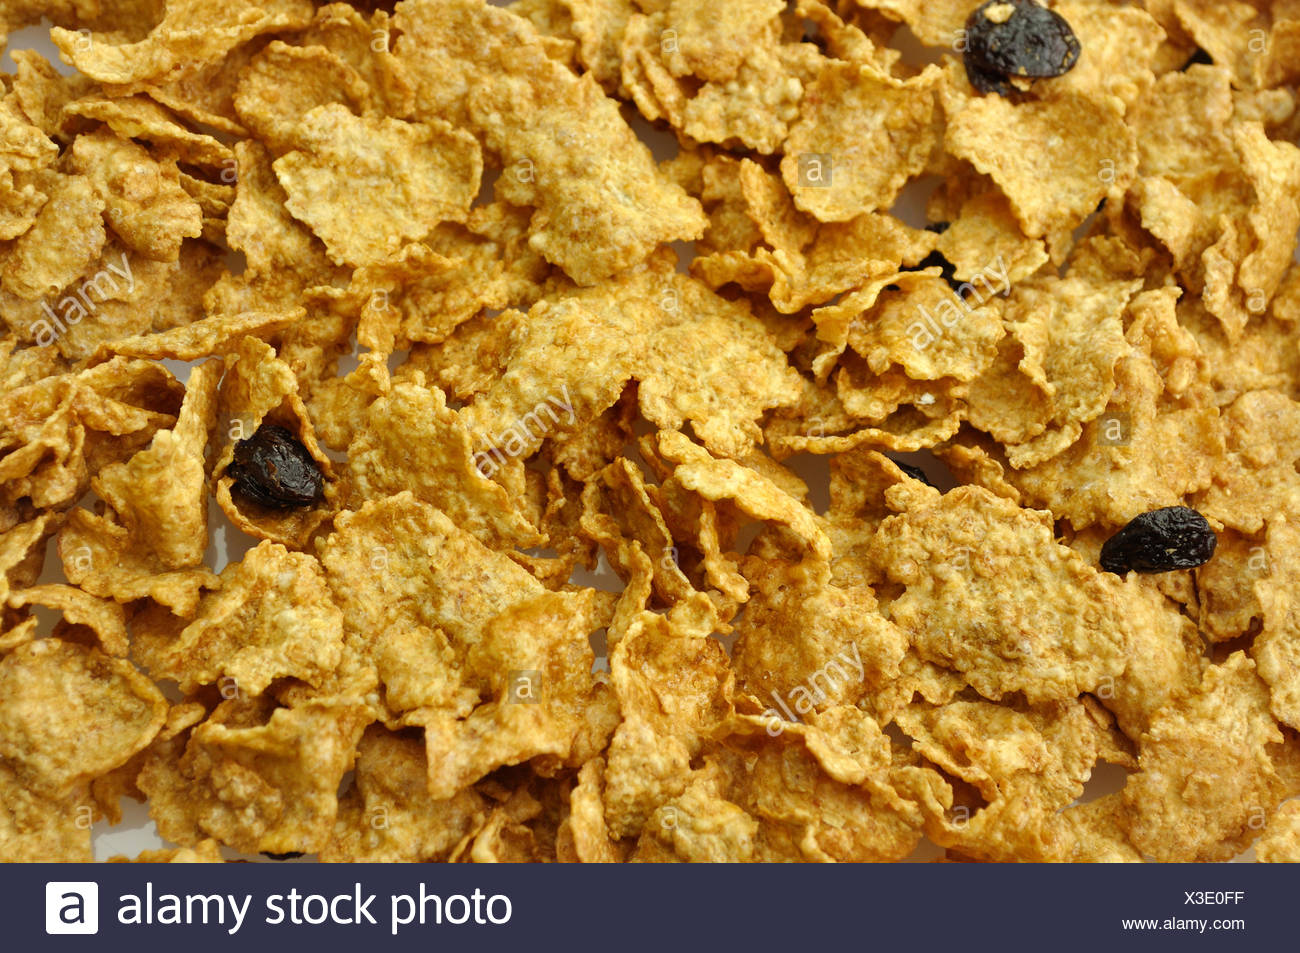 Bran And Raisin Cereal Background Stock Photo